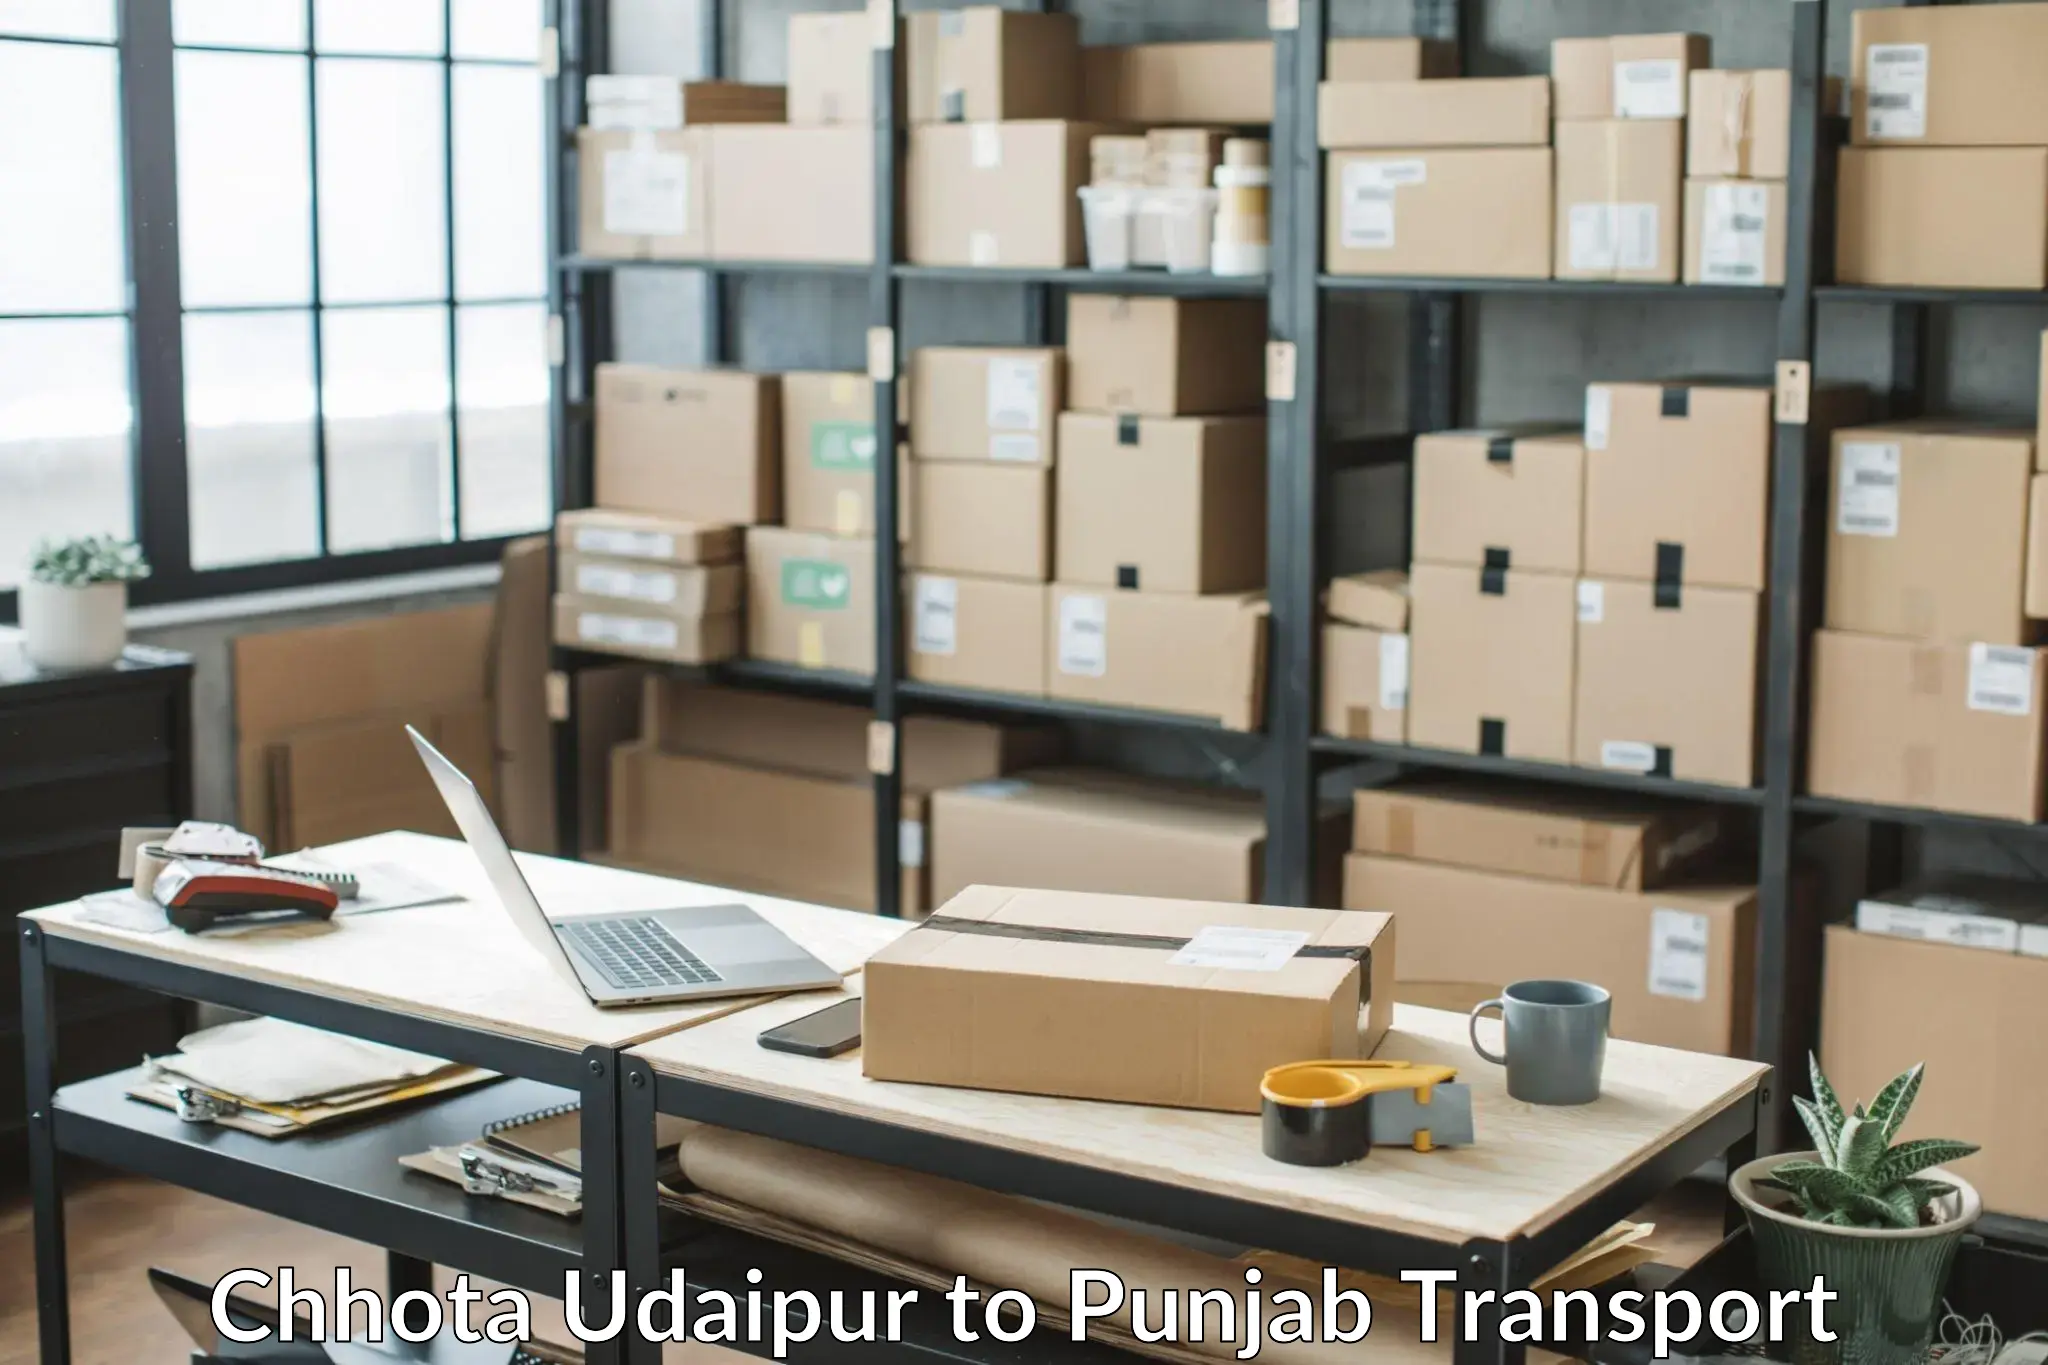 Container transport service Chhota Udaipur to Moga